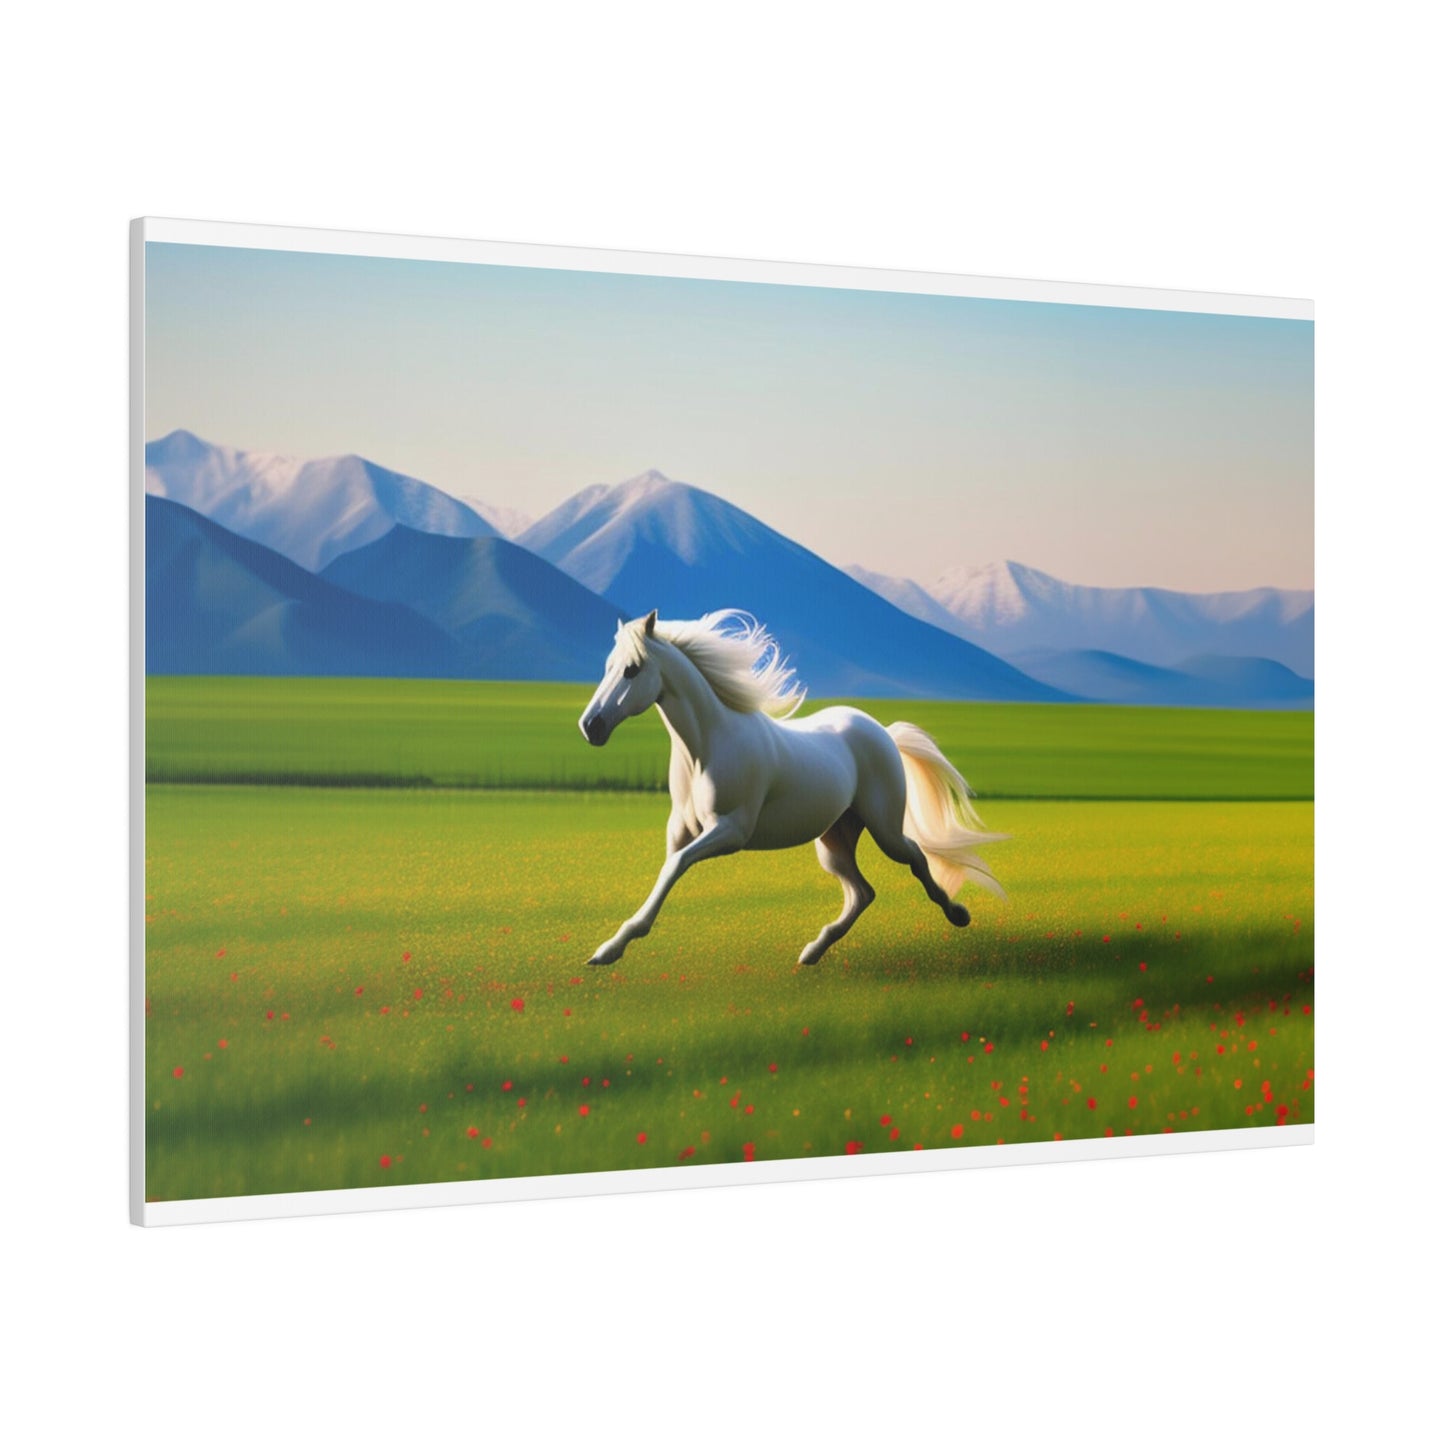 Freedom Galloping Horse - Matte Canvas, Stretched, 0.75"